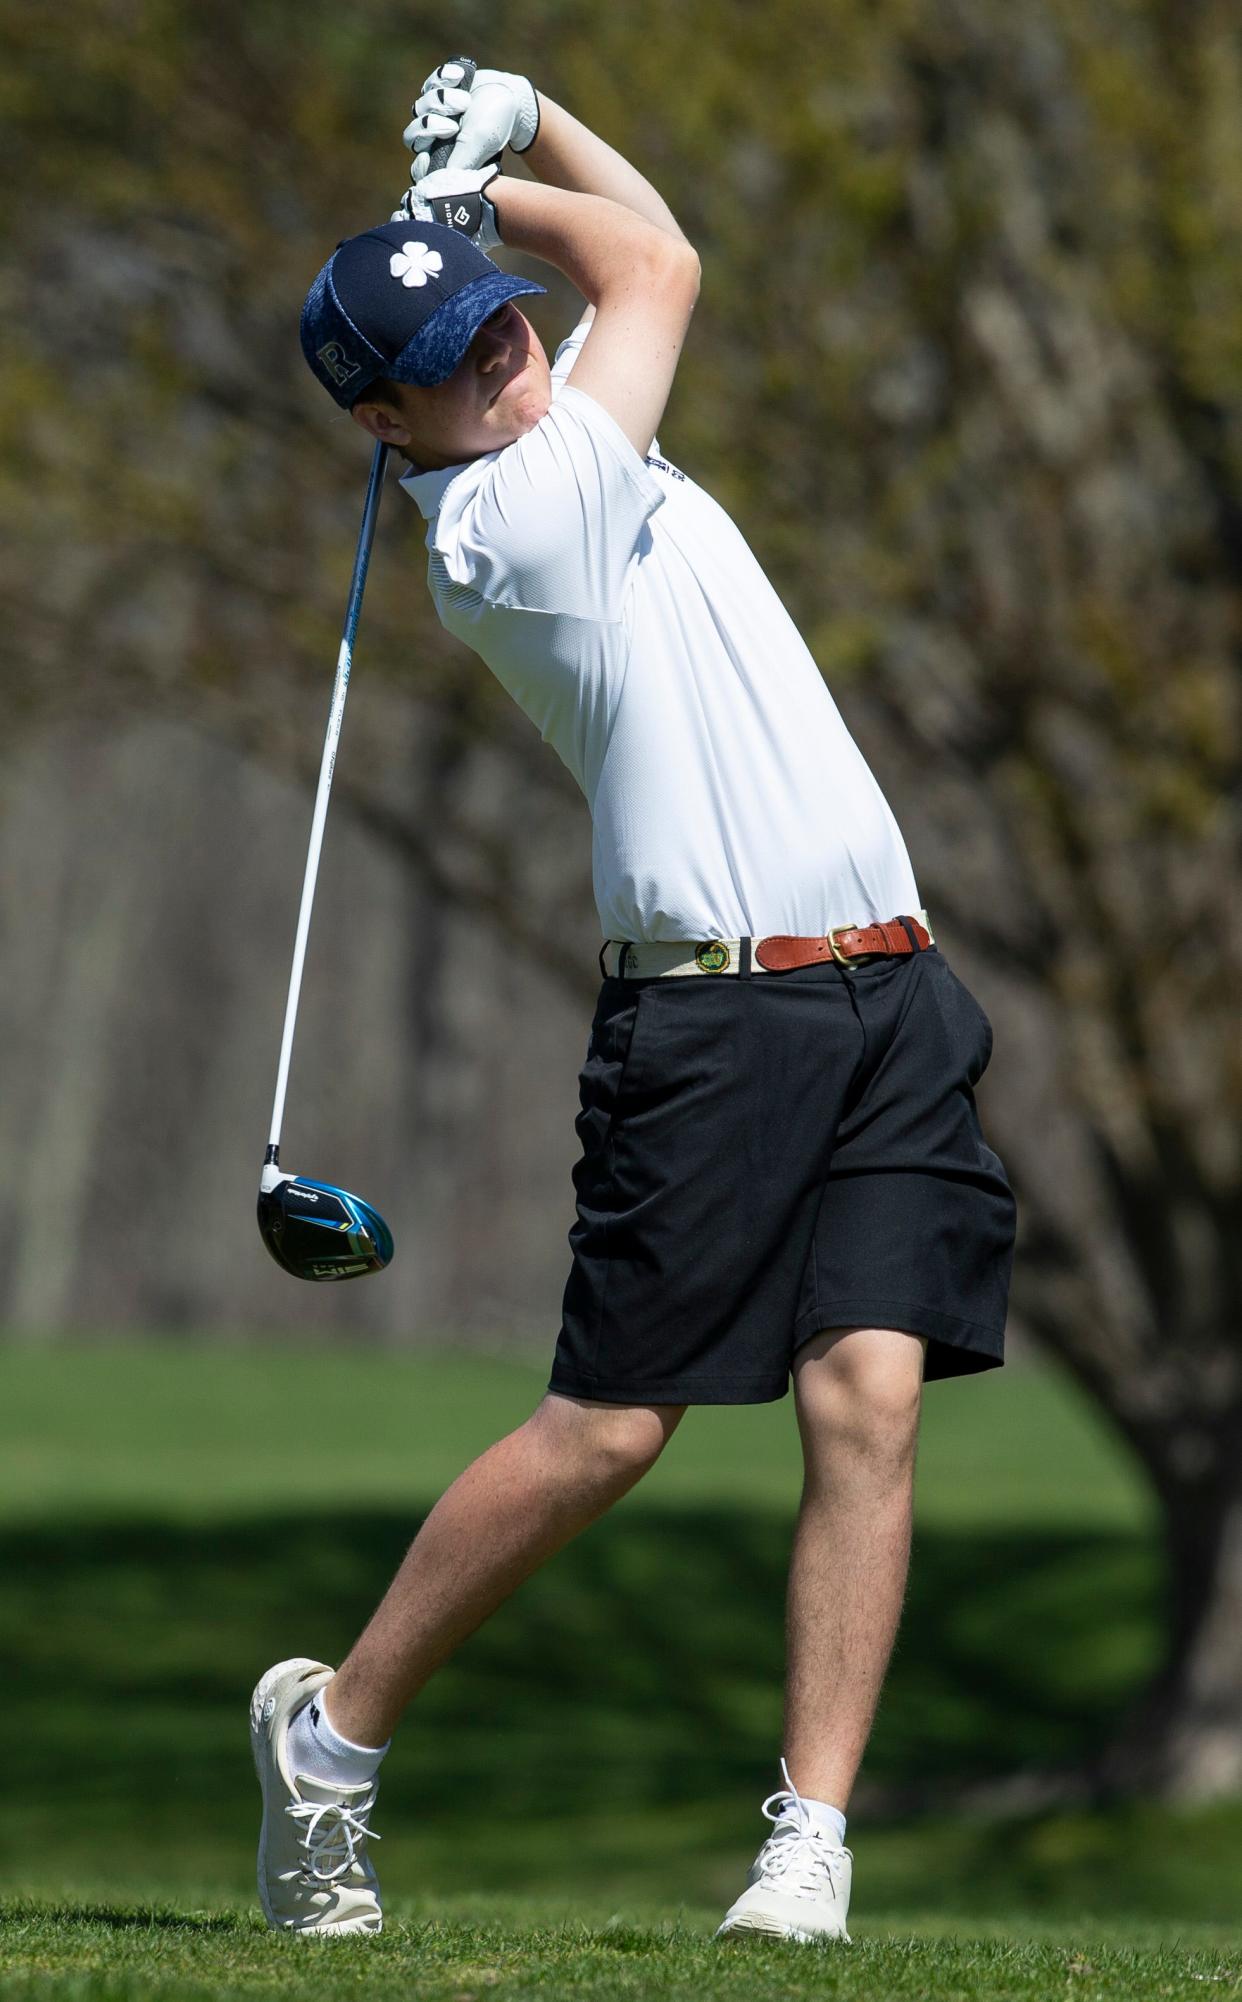 John Welch of Ranney School. The Monmouth County Tournament boys golf event takes place at Howell Park Golf Course. Howell, NJWednesday, April 13, 2022.